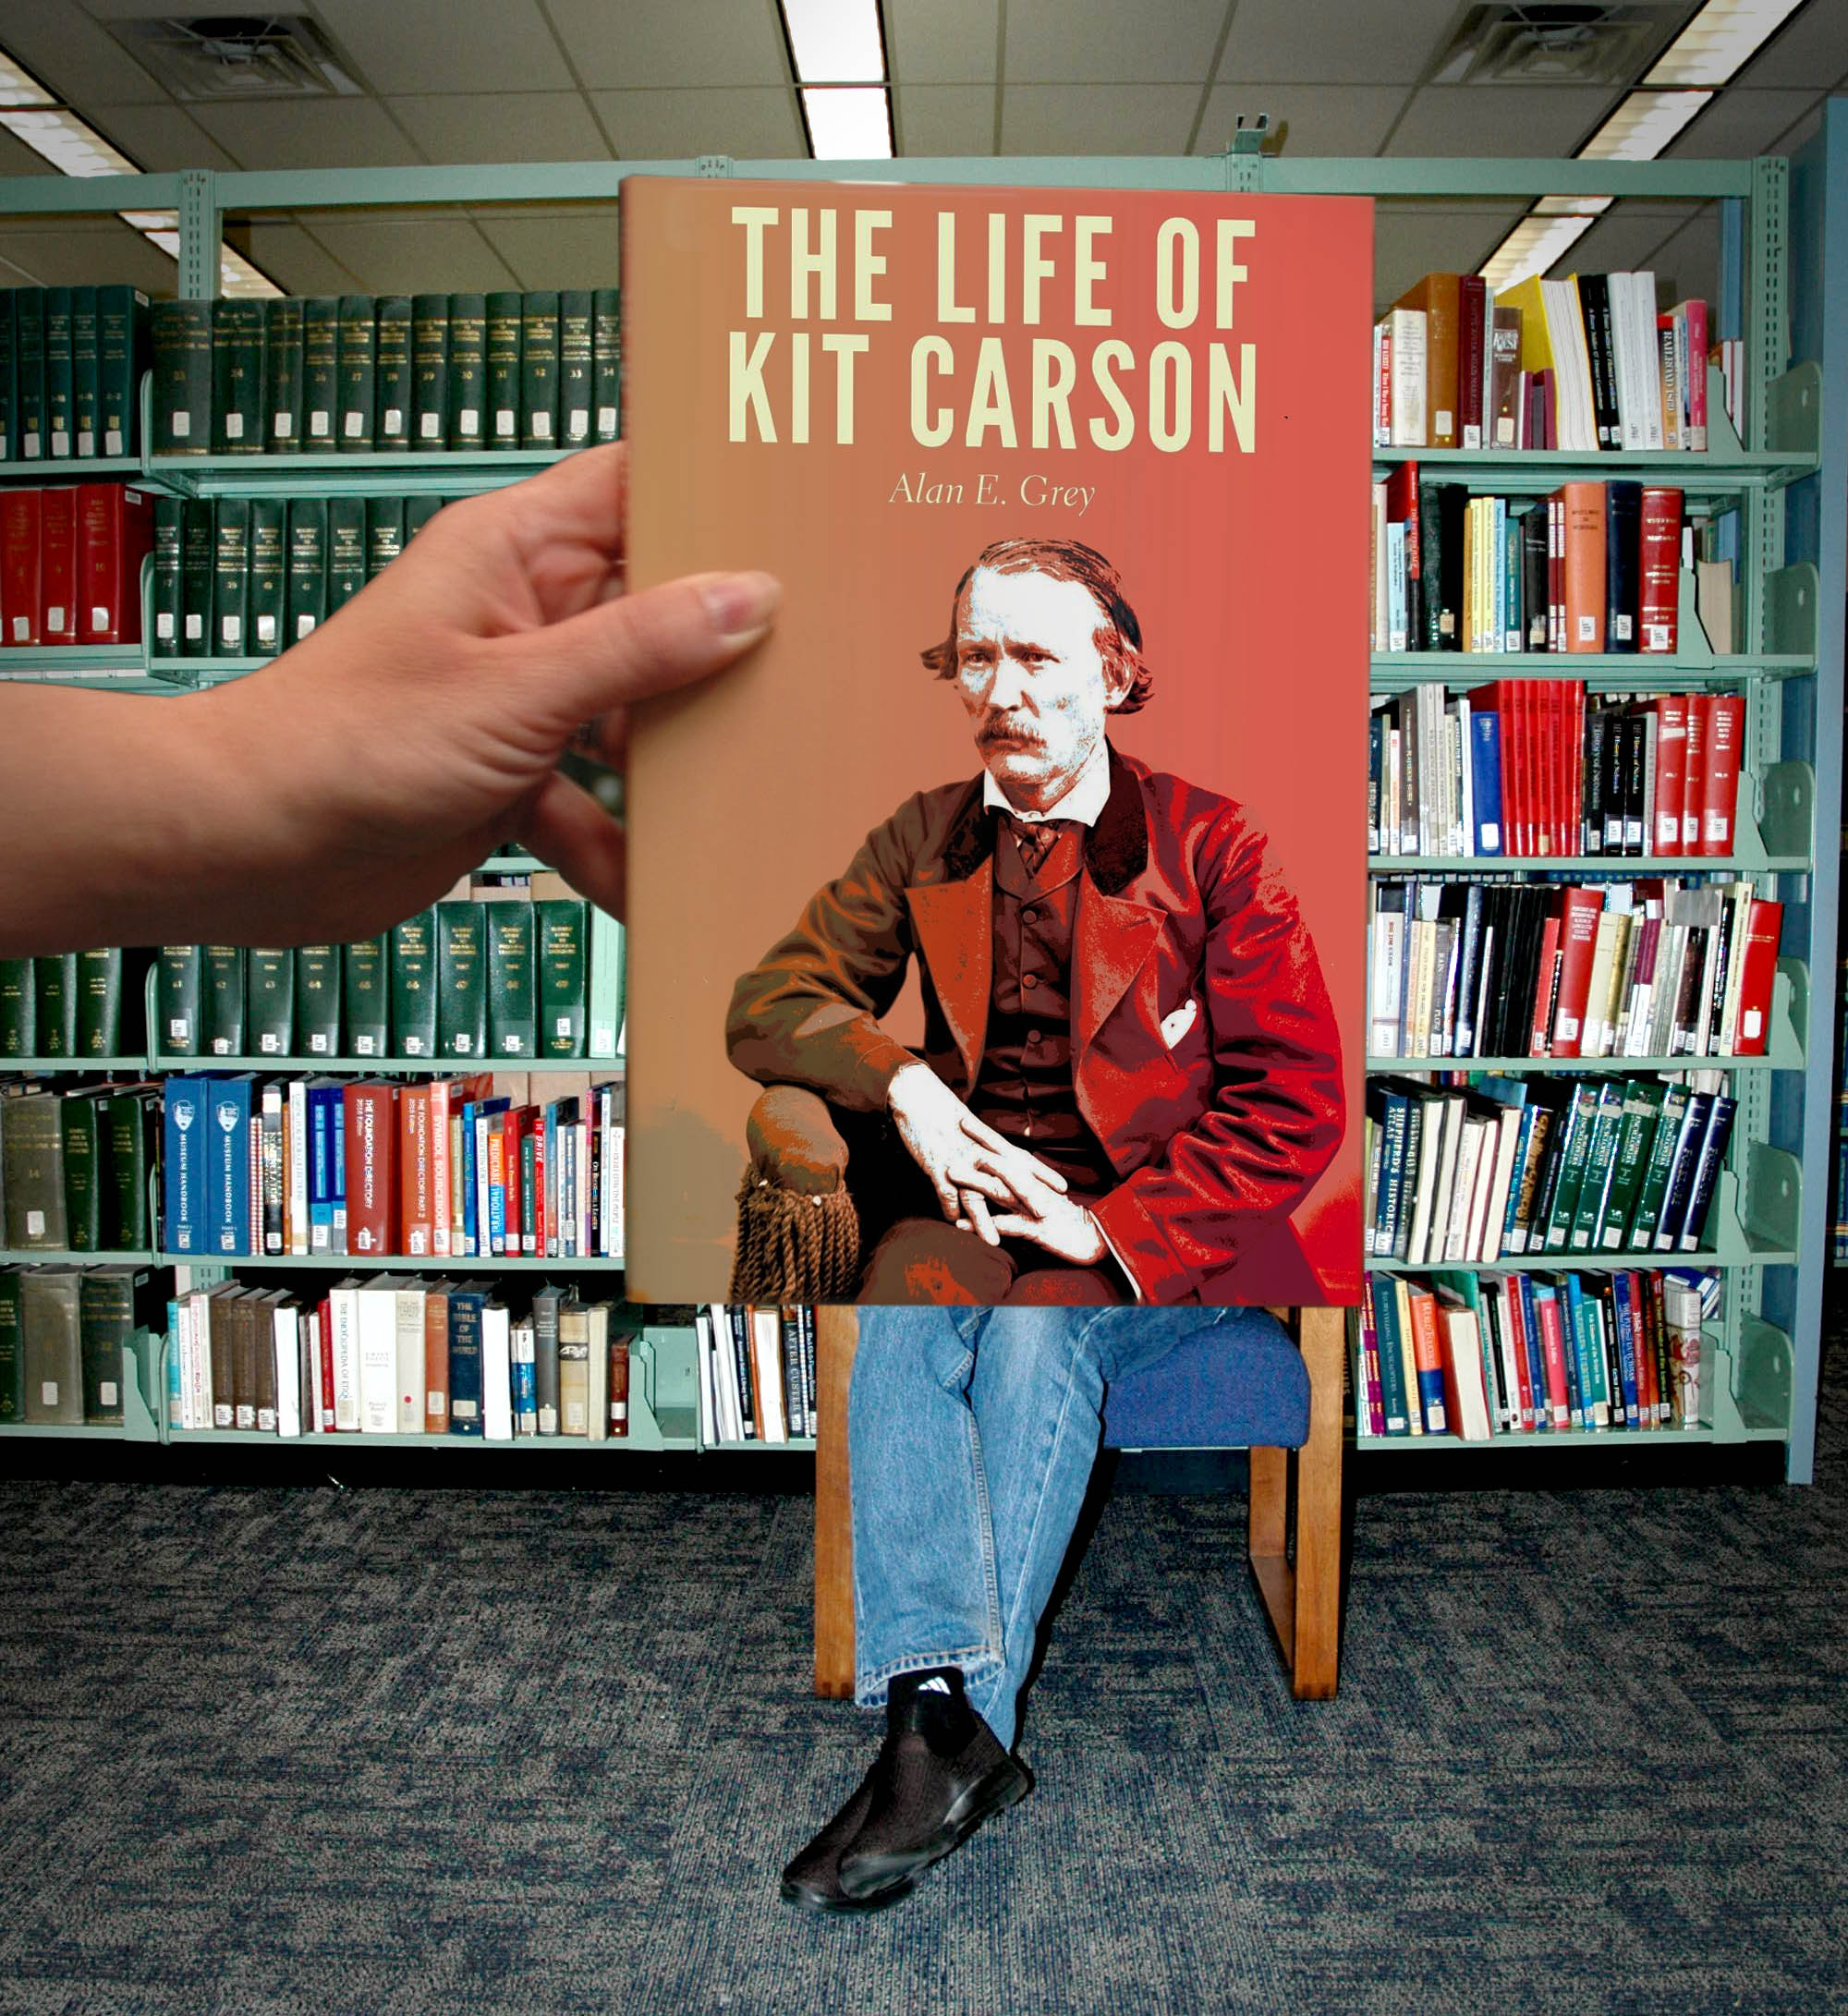 "The Life of Kit Carson" by Alan E. Grey BookFaceFriday Image